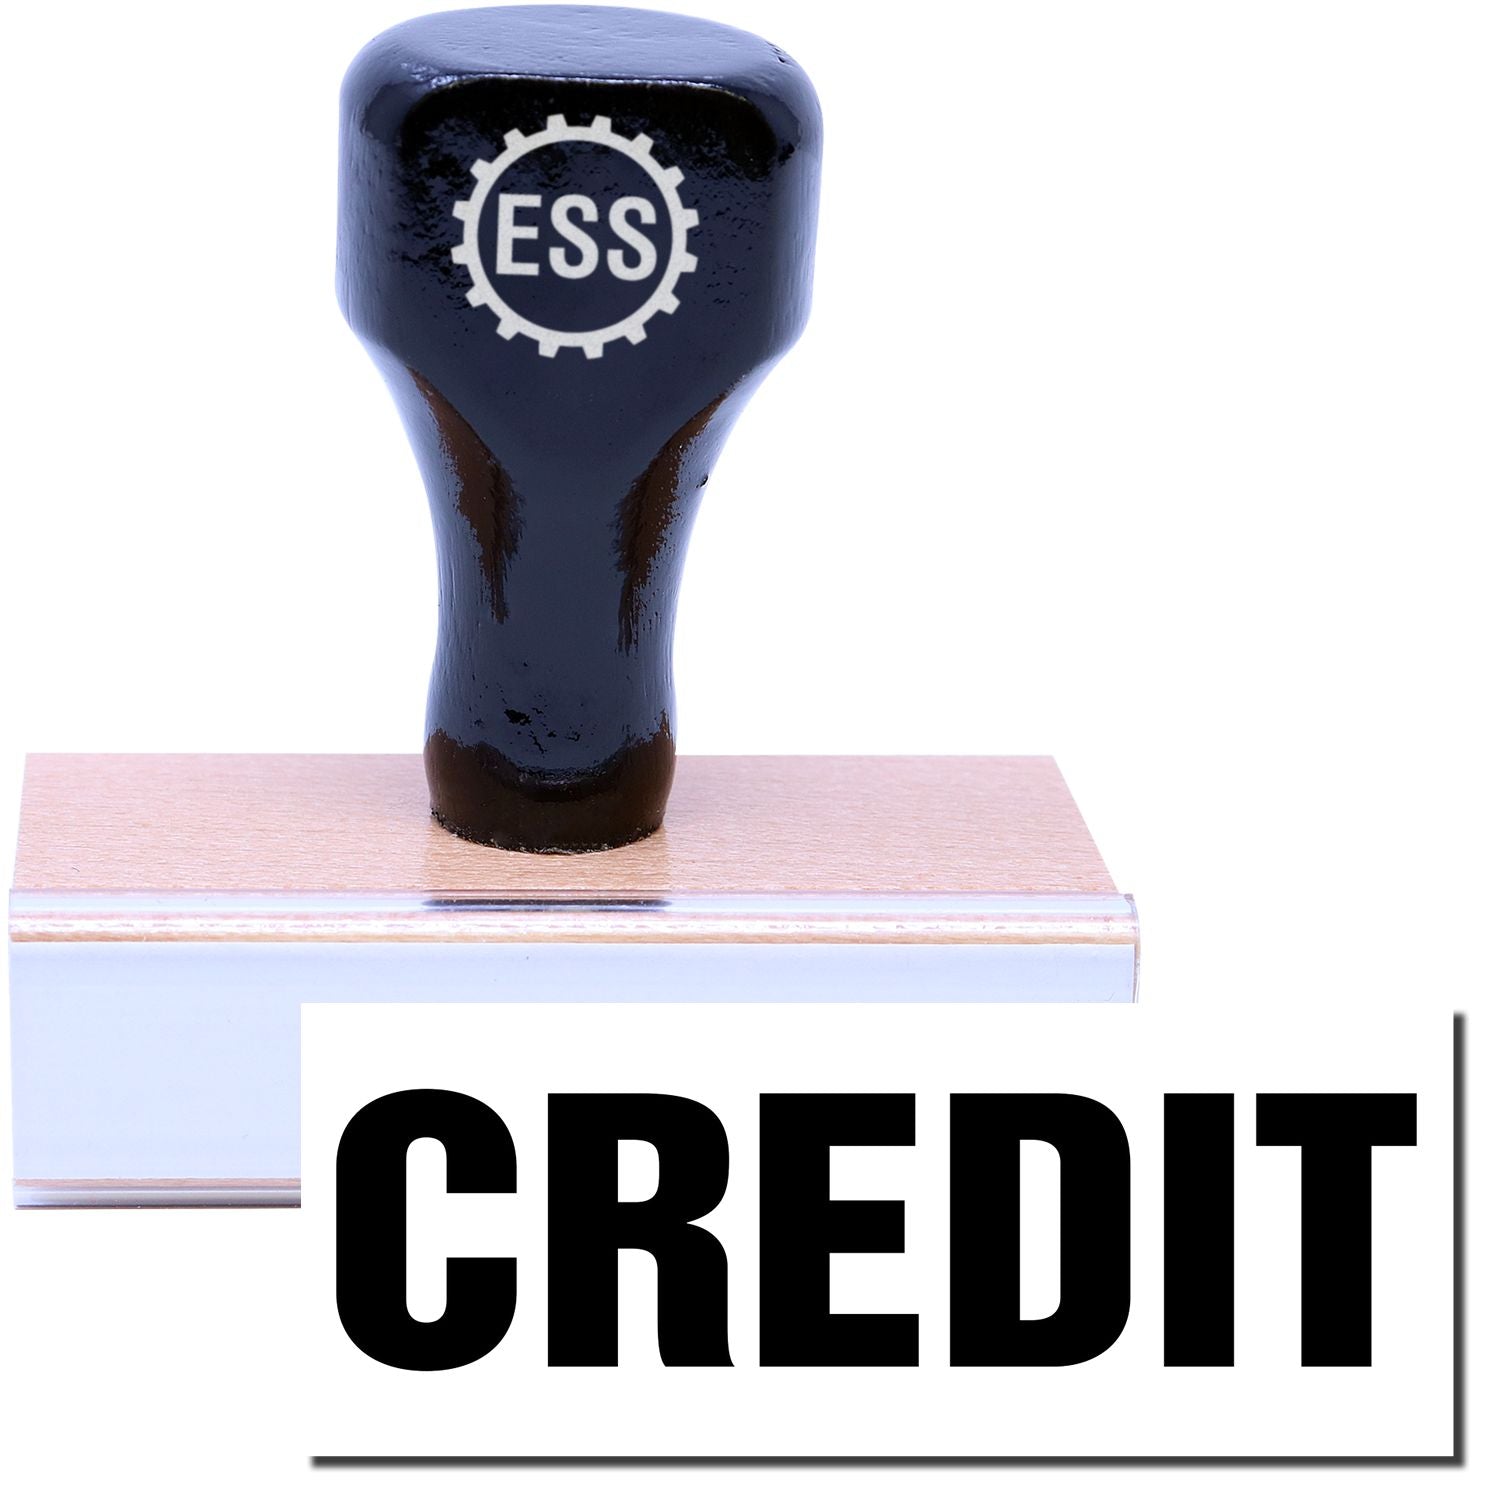 A stock office rubber stamp with a stamped image showing how the text "CREDIT" in a large font is displayed after stamping.